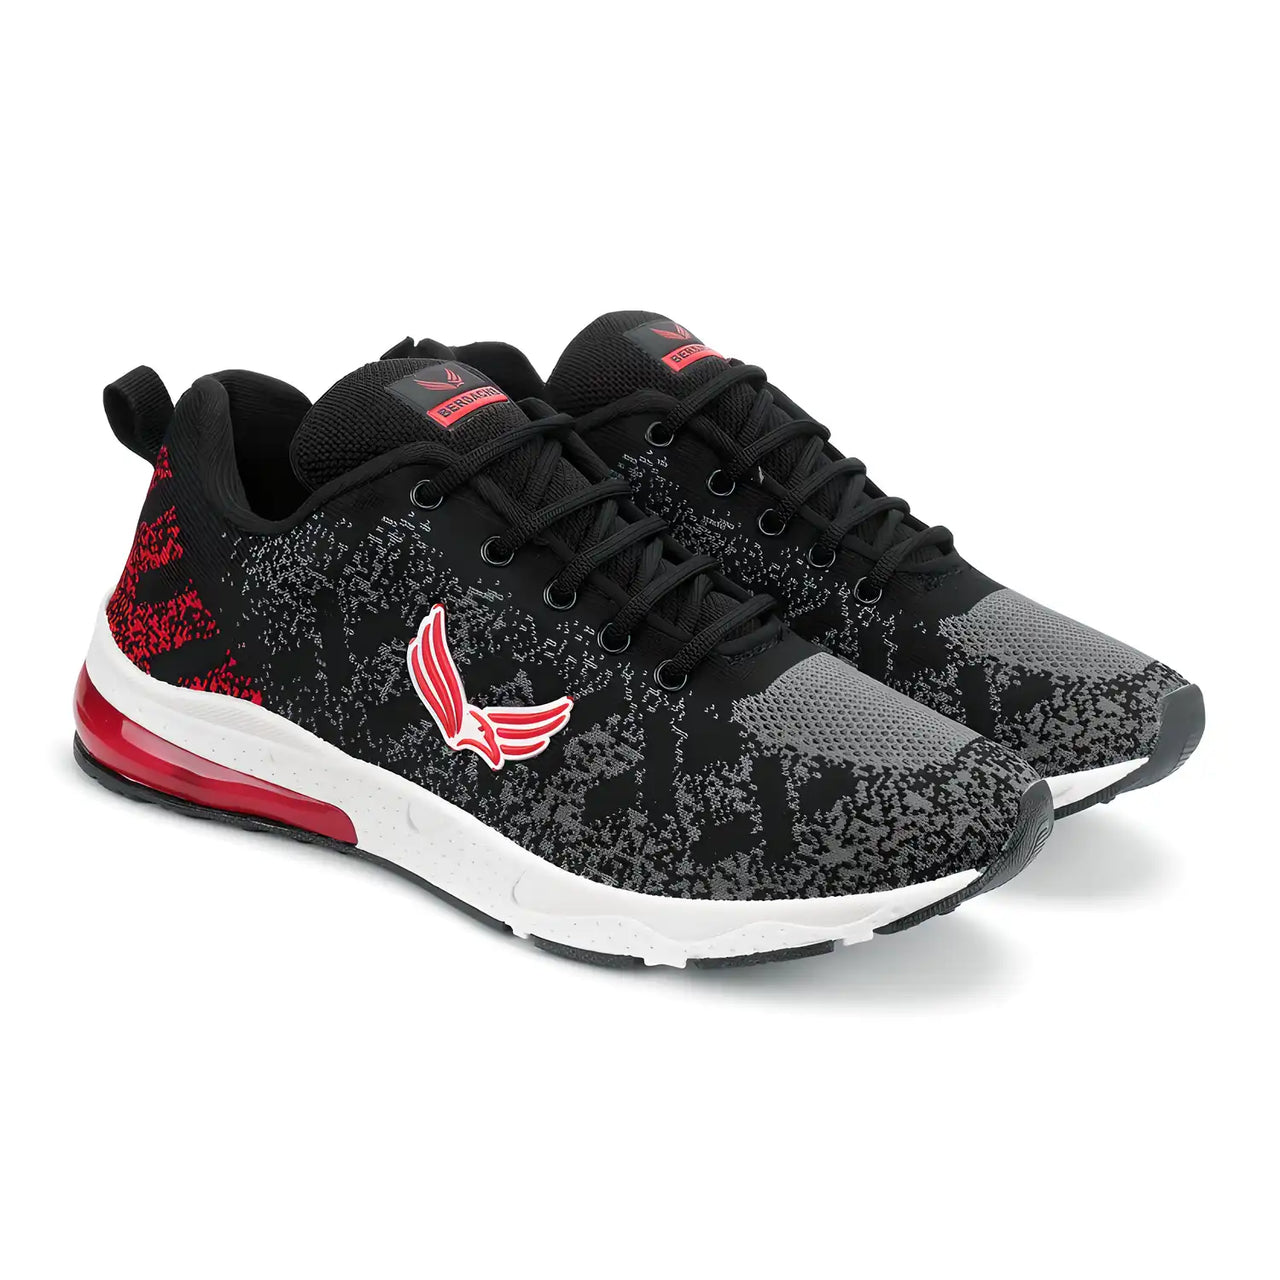 Bersache Latest Stylish Sports Shoes For Mens